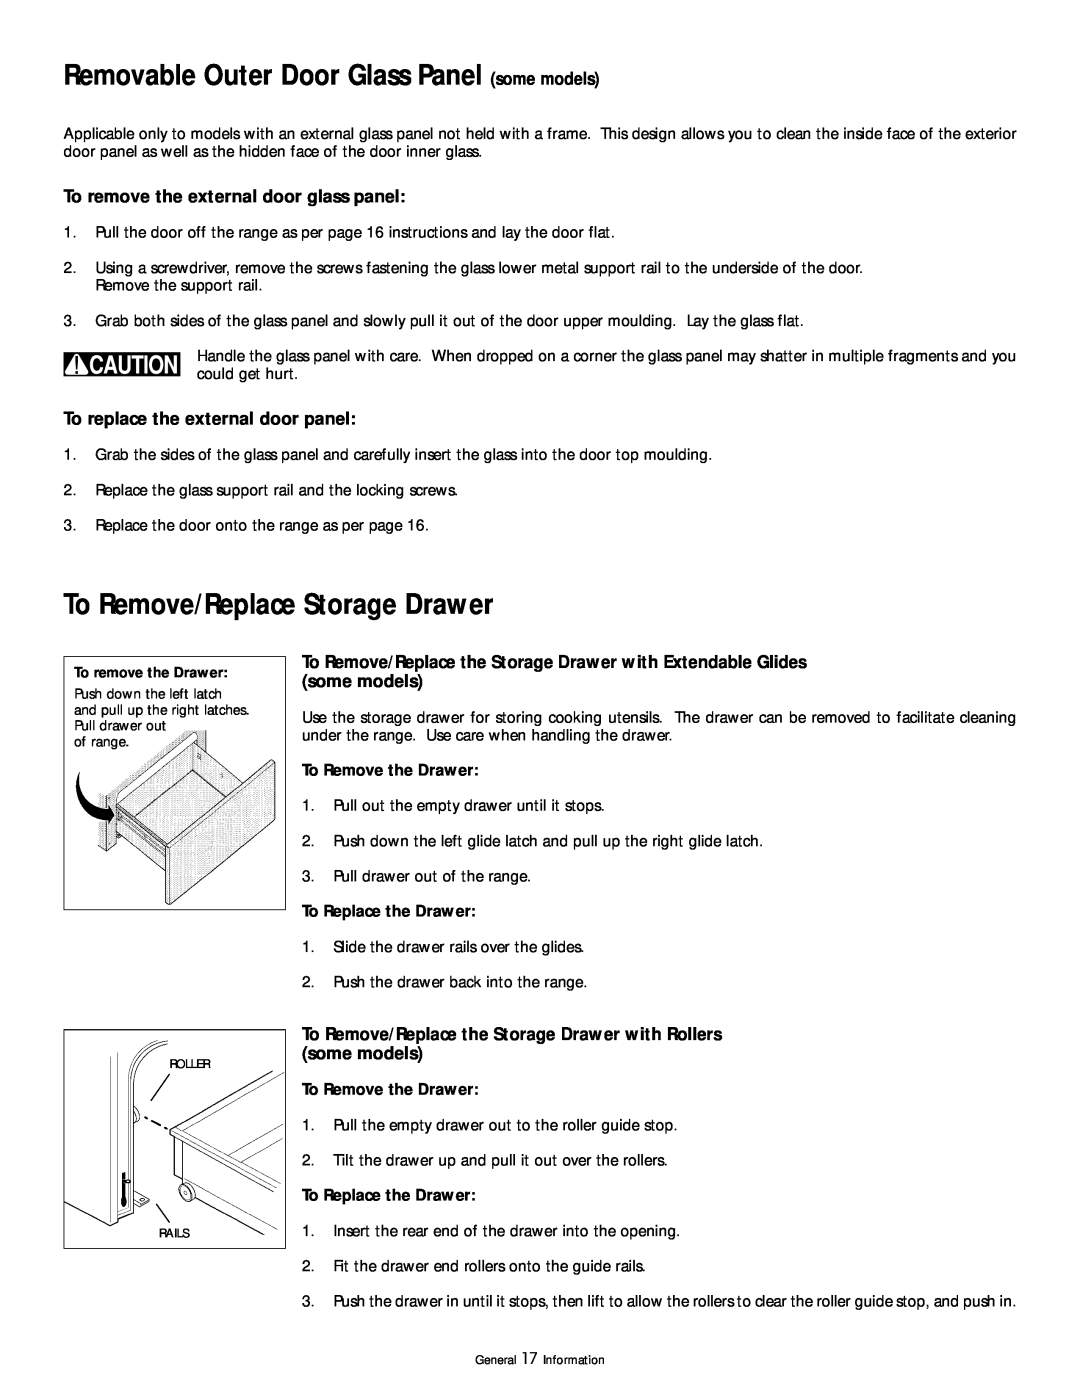 Frigidaire 318200404 Removable Outer Door Glass Panel some models, To Remove/Replace Storage Drawer, To Remove the Drawer 